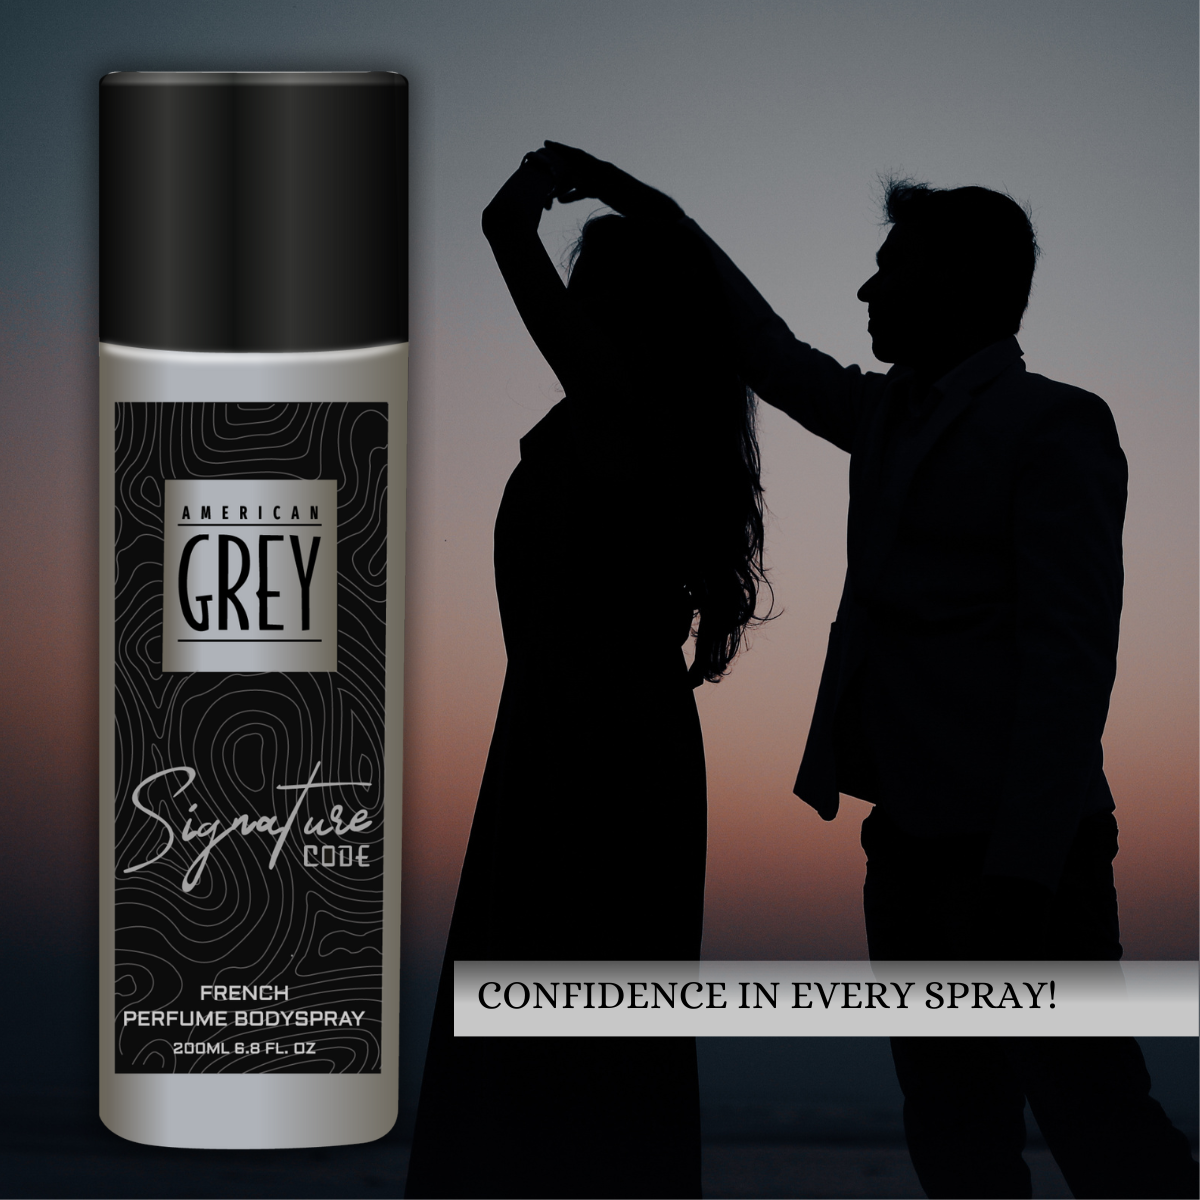 intense fragrance for men, musky and oriental fragrance for men, signature code, men deodorant, deodorant for men at best price in india, powerful fragrance for men, signature code deo for men, signature code men deodorant, buy men deodorant online, best long lasting deo for men in india, best long lasting deo for men, best long lasting deodorant in india for male 2023, best deo spray in India, best deo for men, best men deo brand in India, best musk smelling deo for men,  top rated men deo, men grooming essential, men fragrance for winter season, best deo for cold weather, popular winter deodorant for men, best smelling deo for evening wear